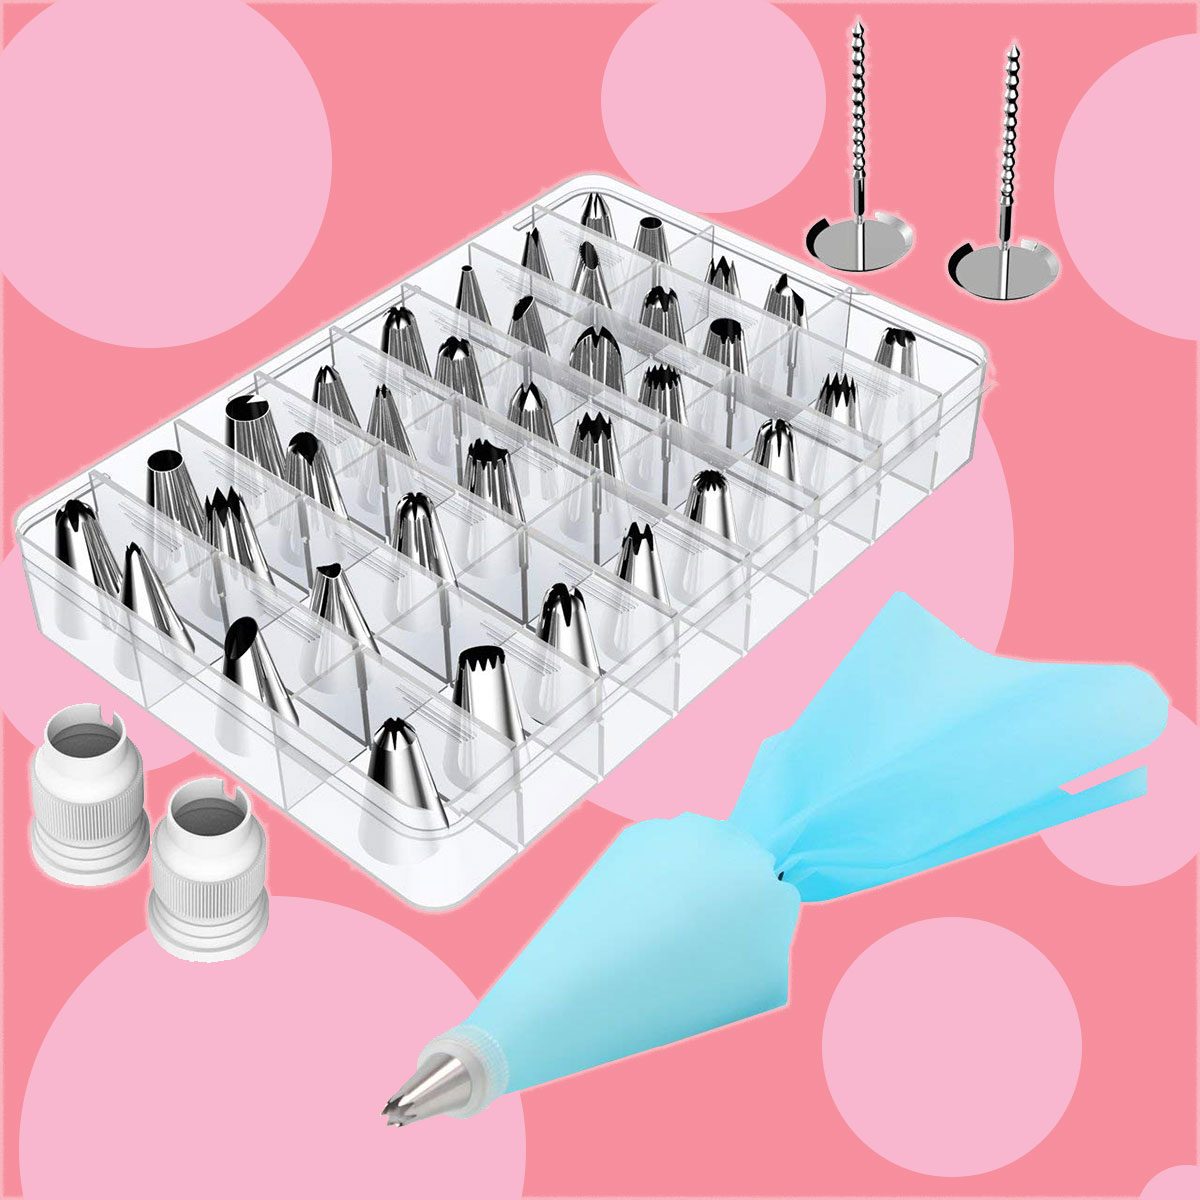 Kootek 42 Pieces Cake Decorating Supplies Kit with 36 Icing Tips, 2 Silicone Pastry Bags, 2 Flower Nails, 2 Reusable Plastic Couplers Baking Supplies Frosting Tools Set for Cupcakes Cookies